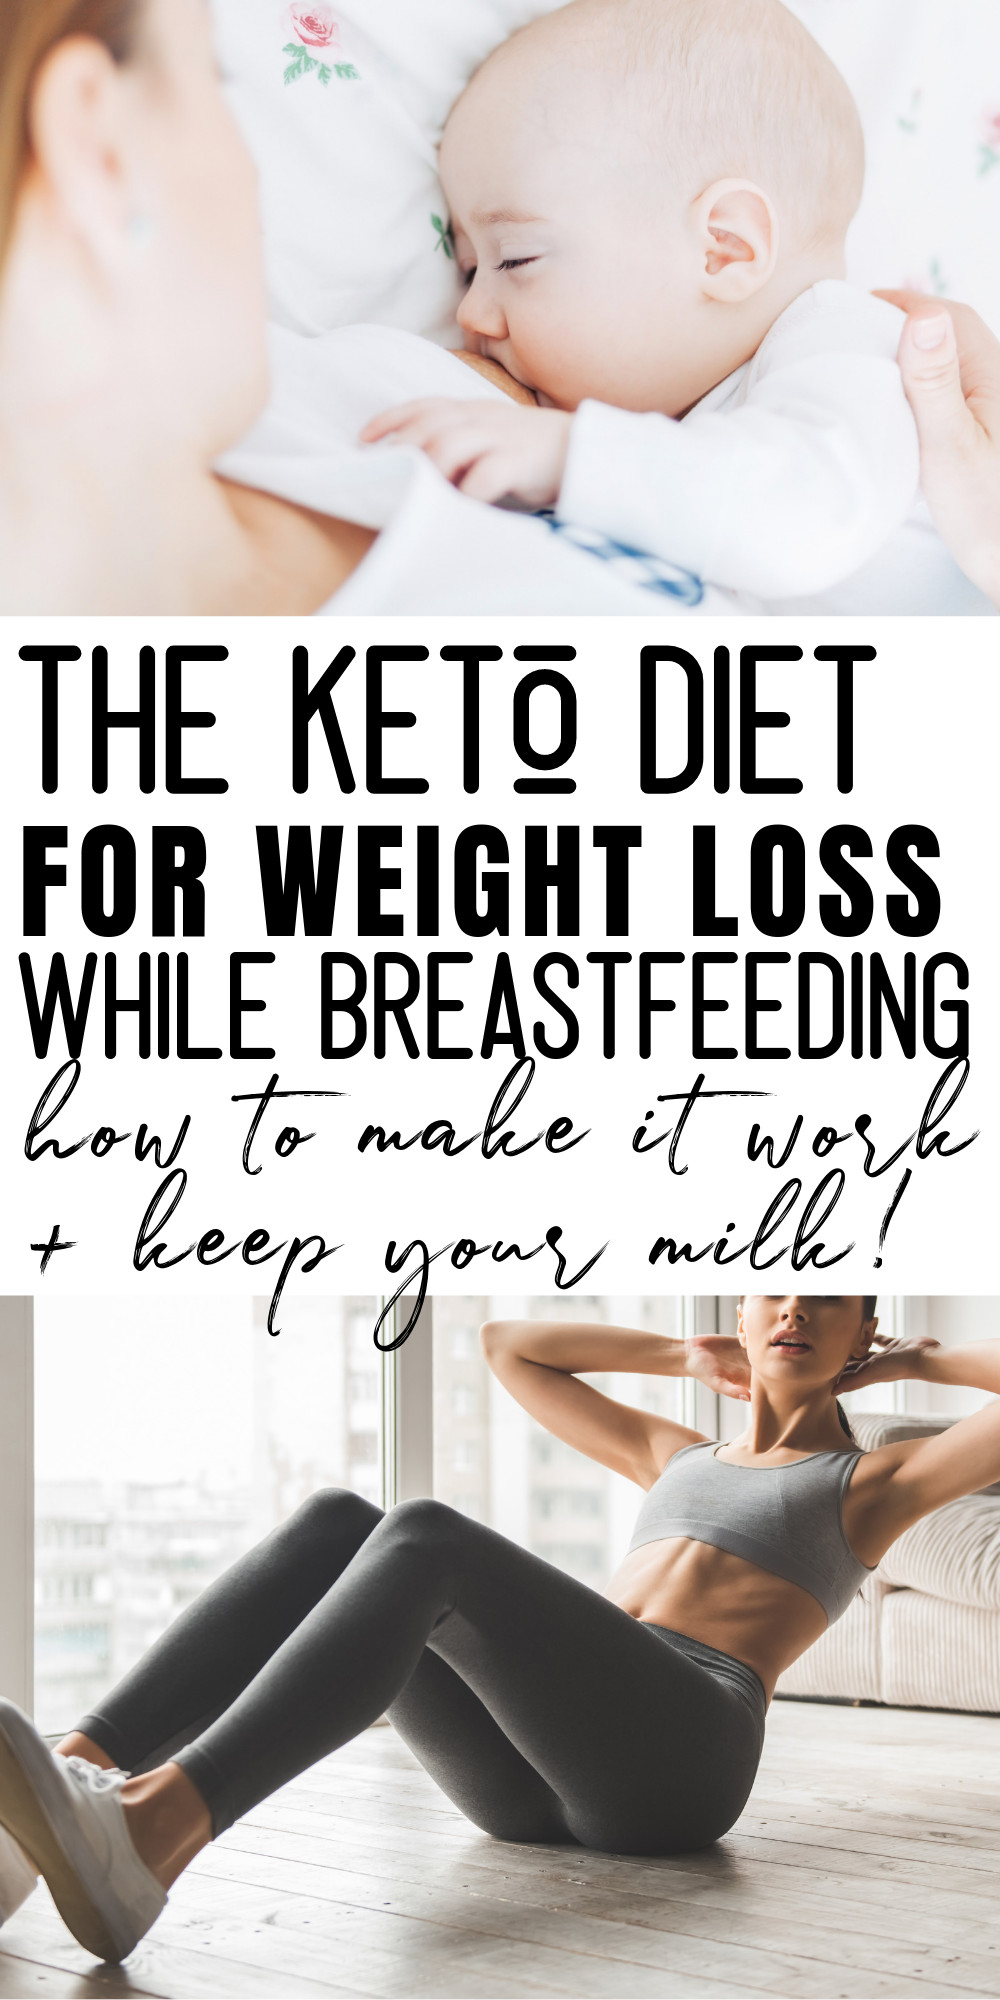 Keto Diet Breastfeeding
 Modifications You Need To Make To Your Keto Diet While